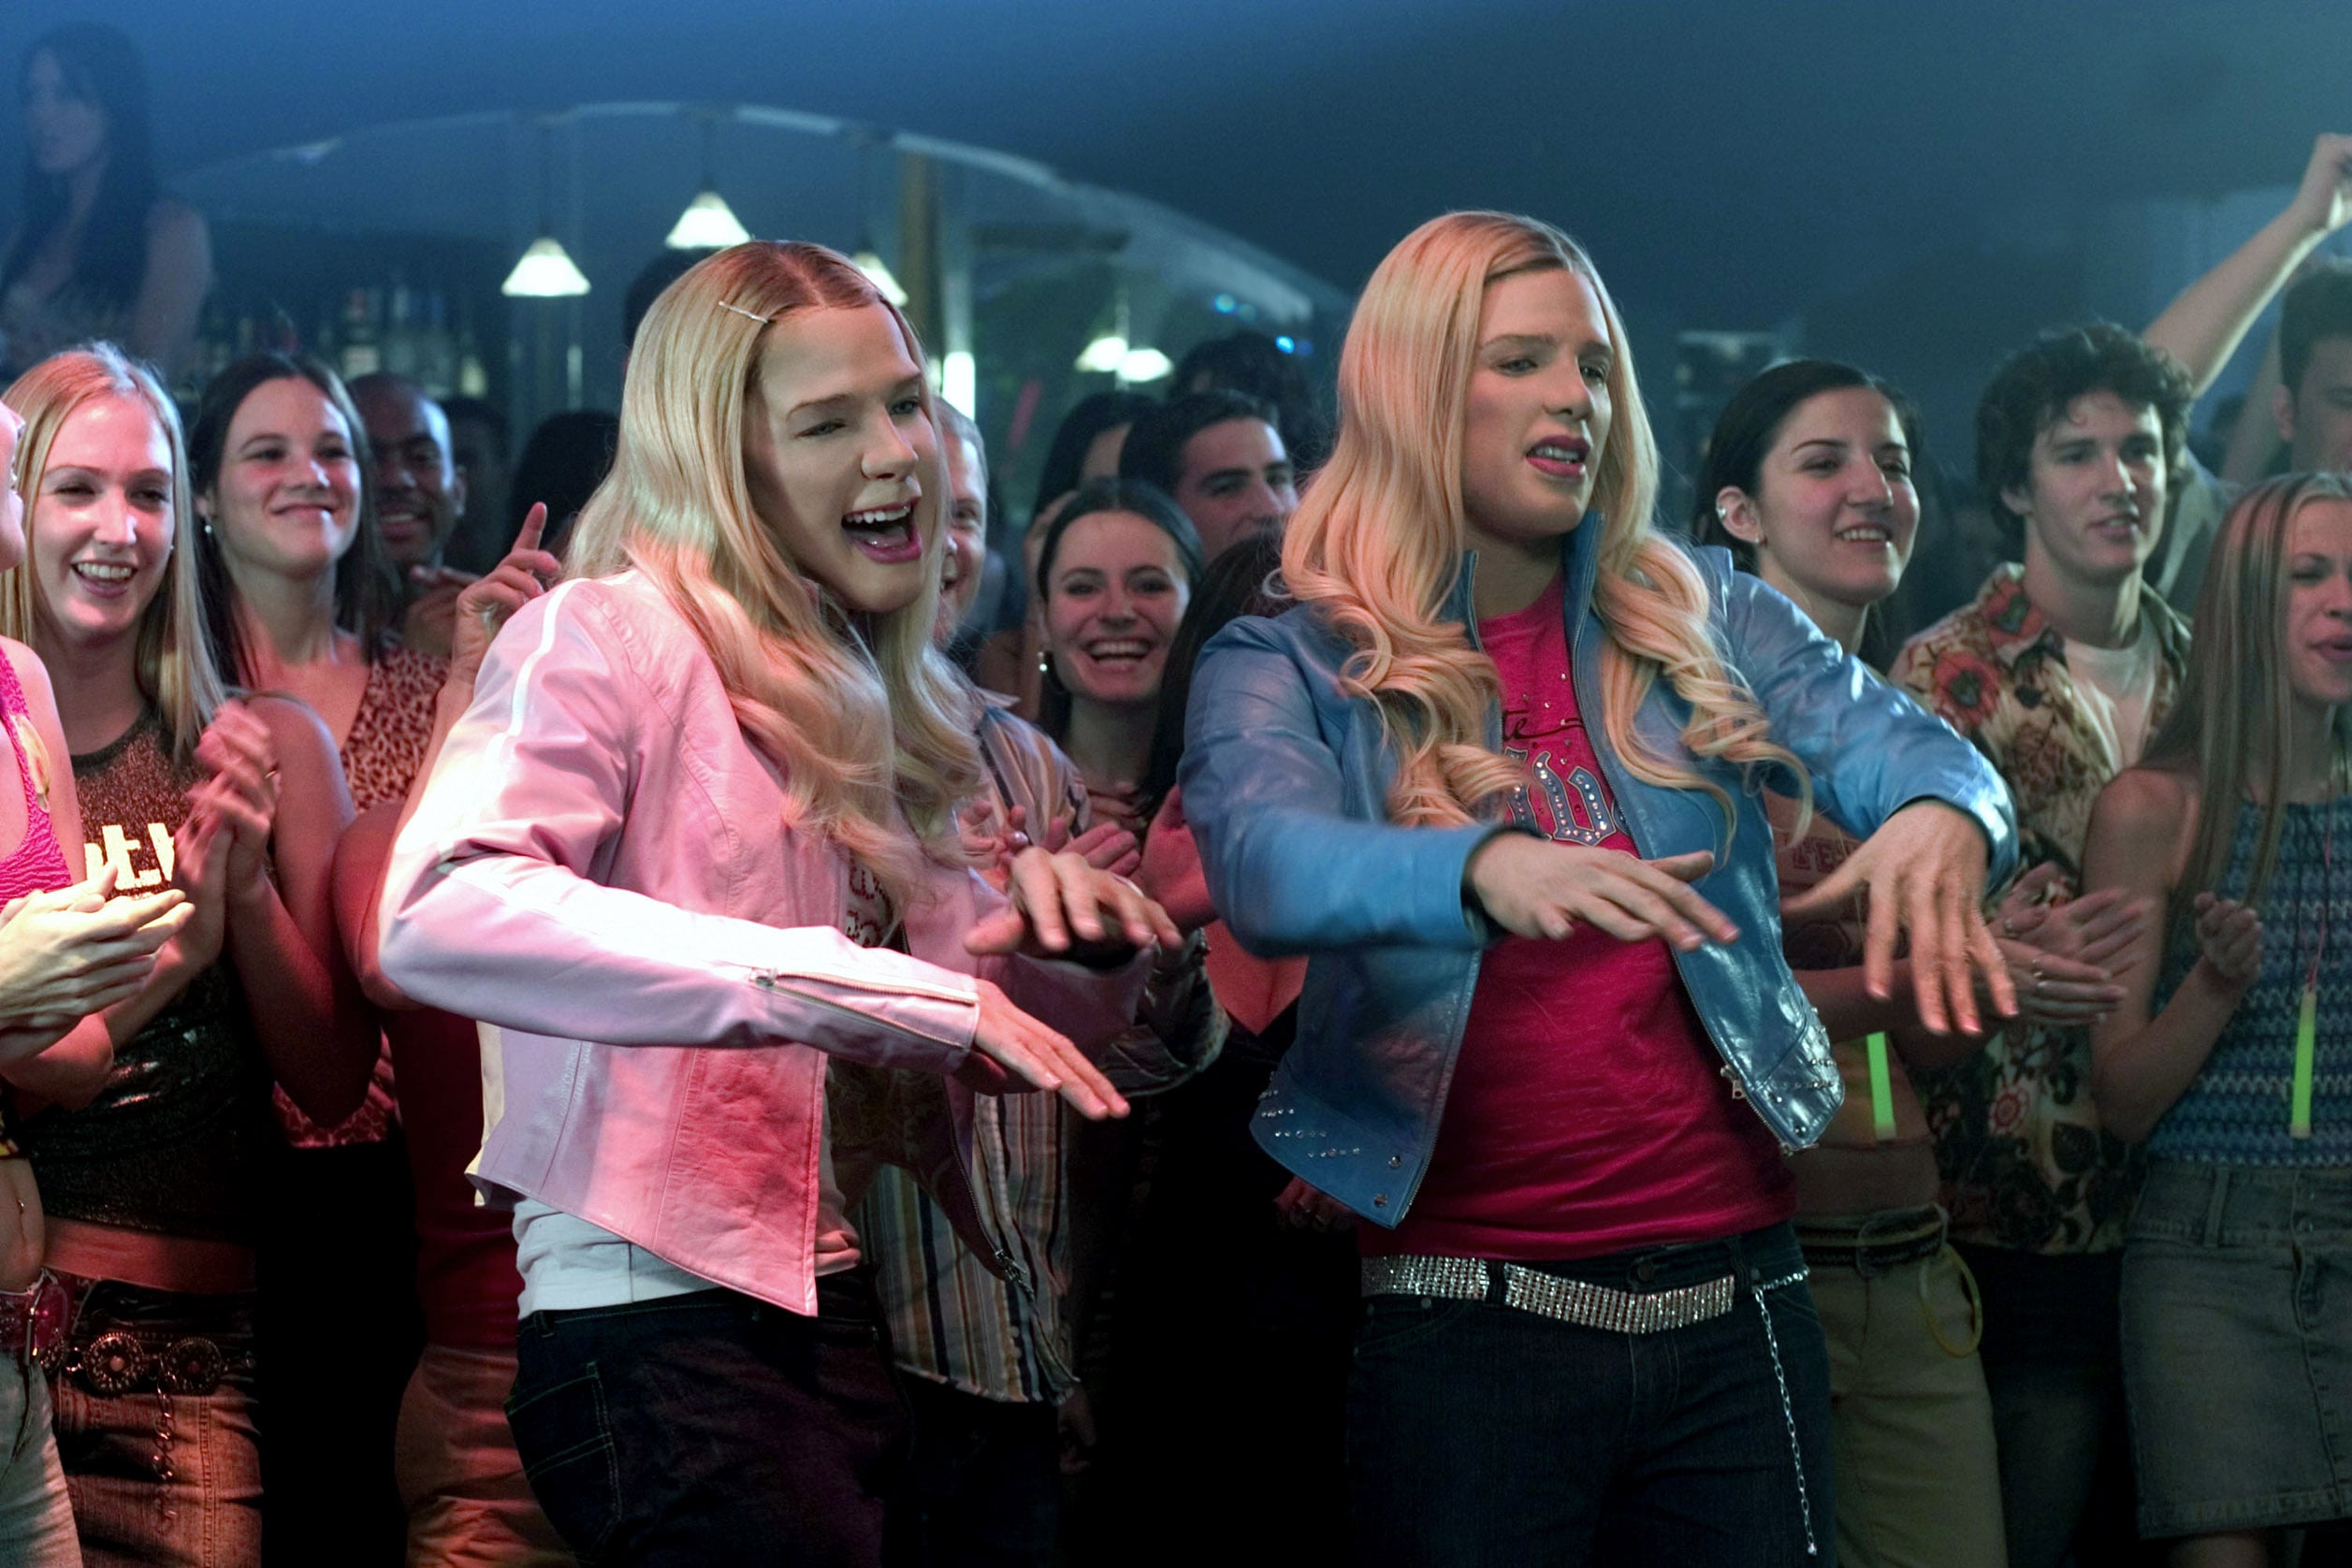 Busy Philipps recreates her iconic dance-off scene from White Chicks with  co-stars Jaime King